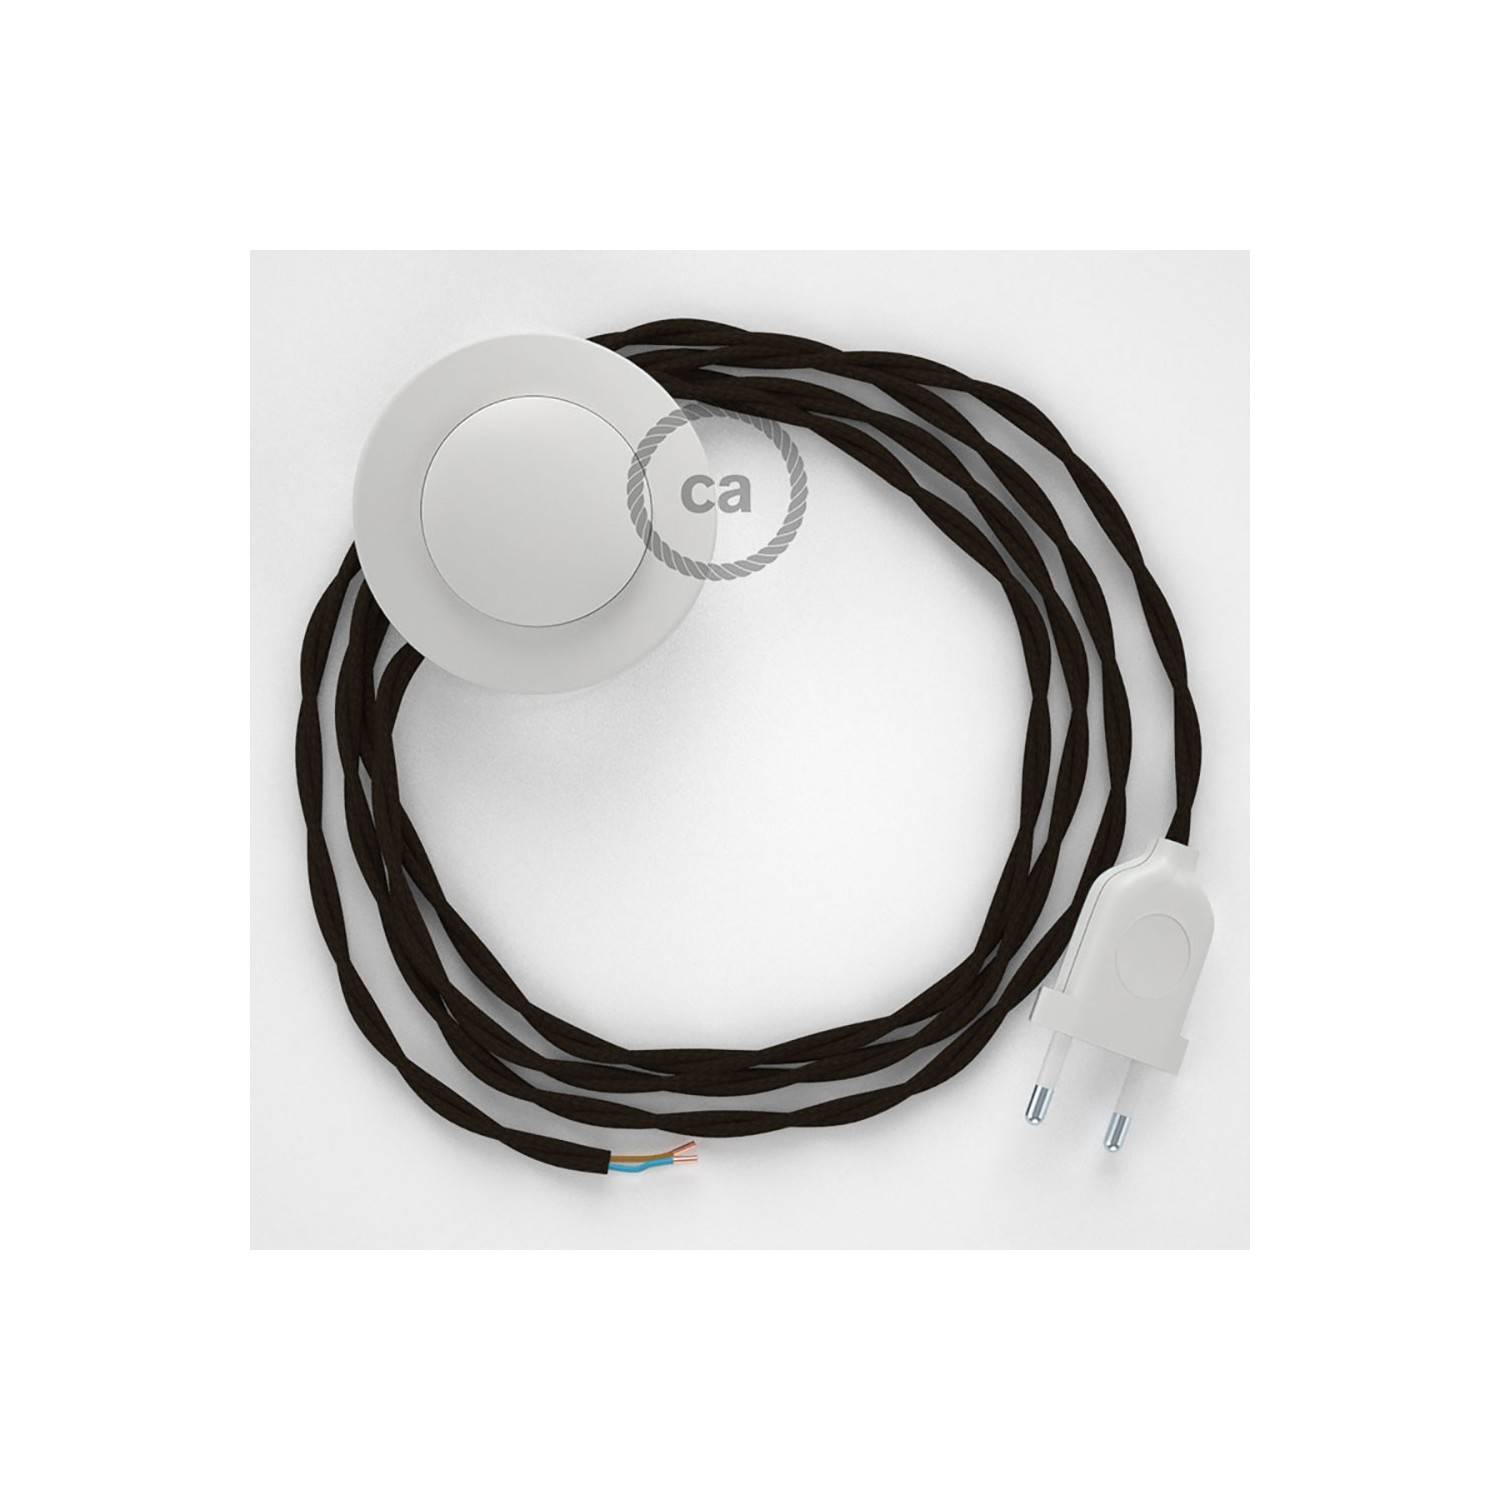 Wiring Pedestal, TM13 Brown Rayon 3 m. Choose the colour of the switch and plug.